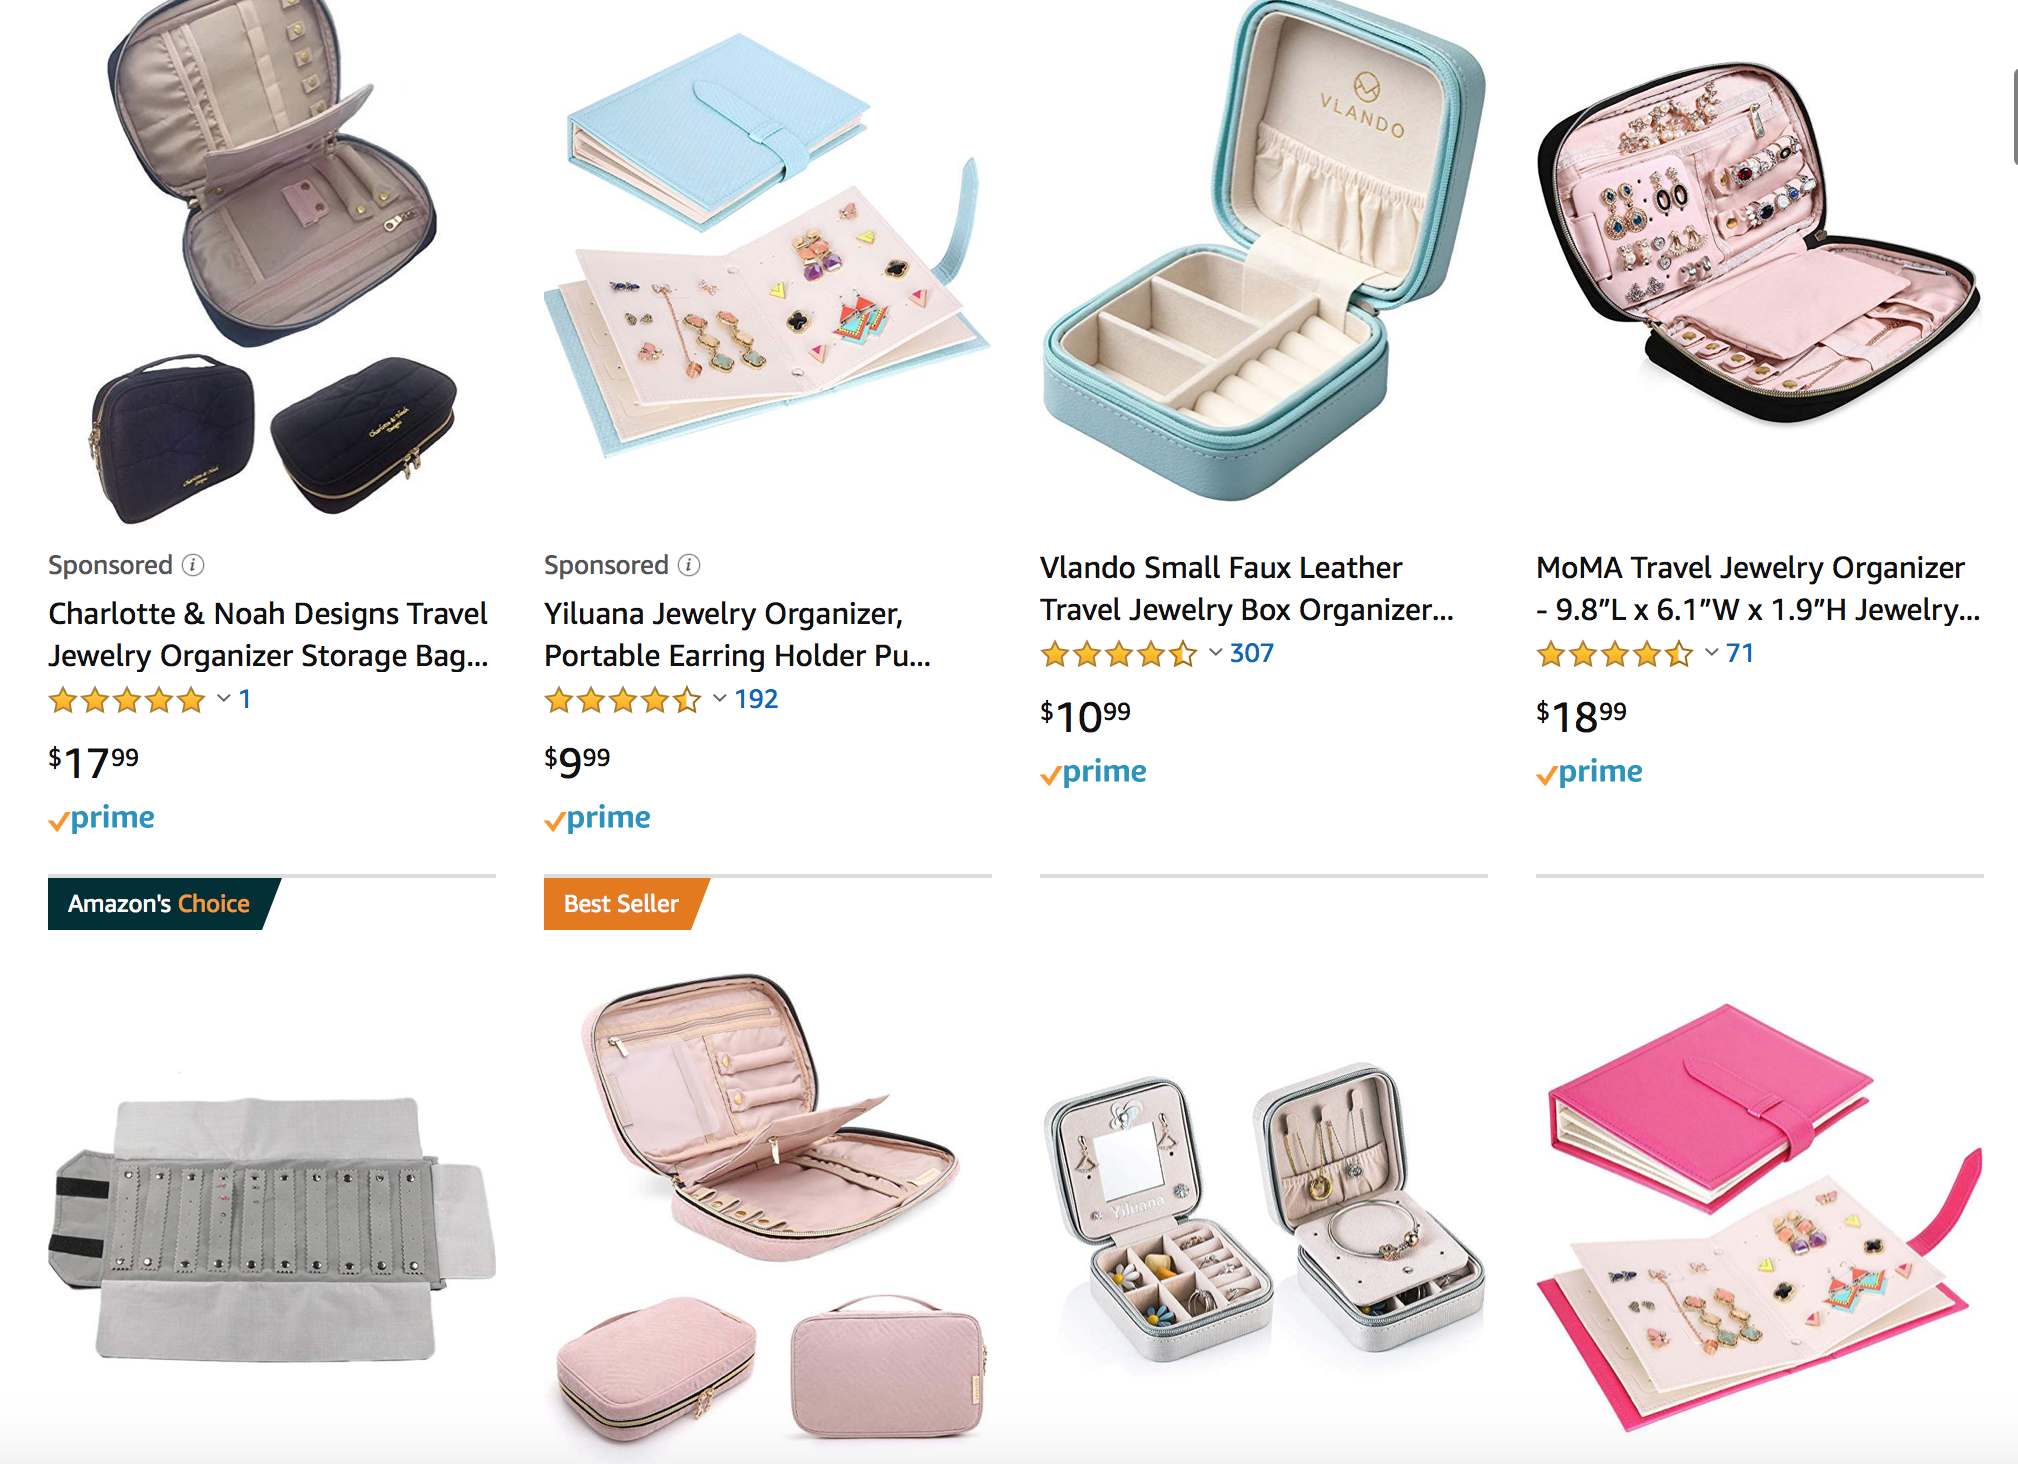 Amazon listing optimization: first page of Amazon search results for jewelry kit